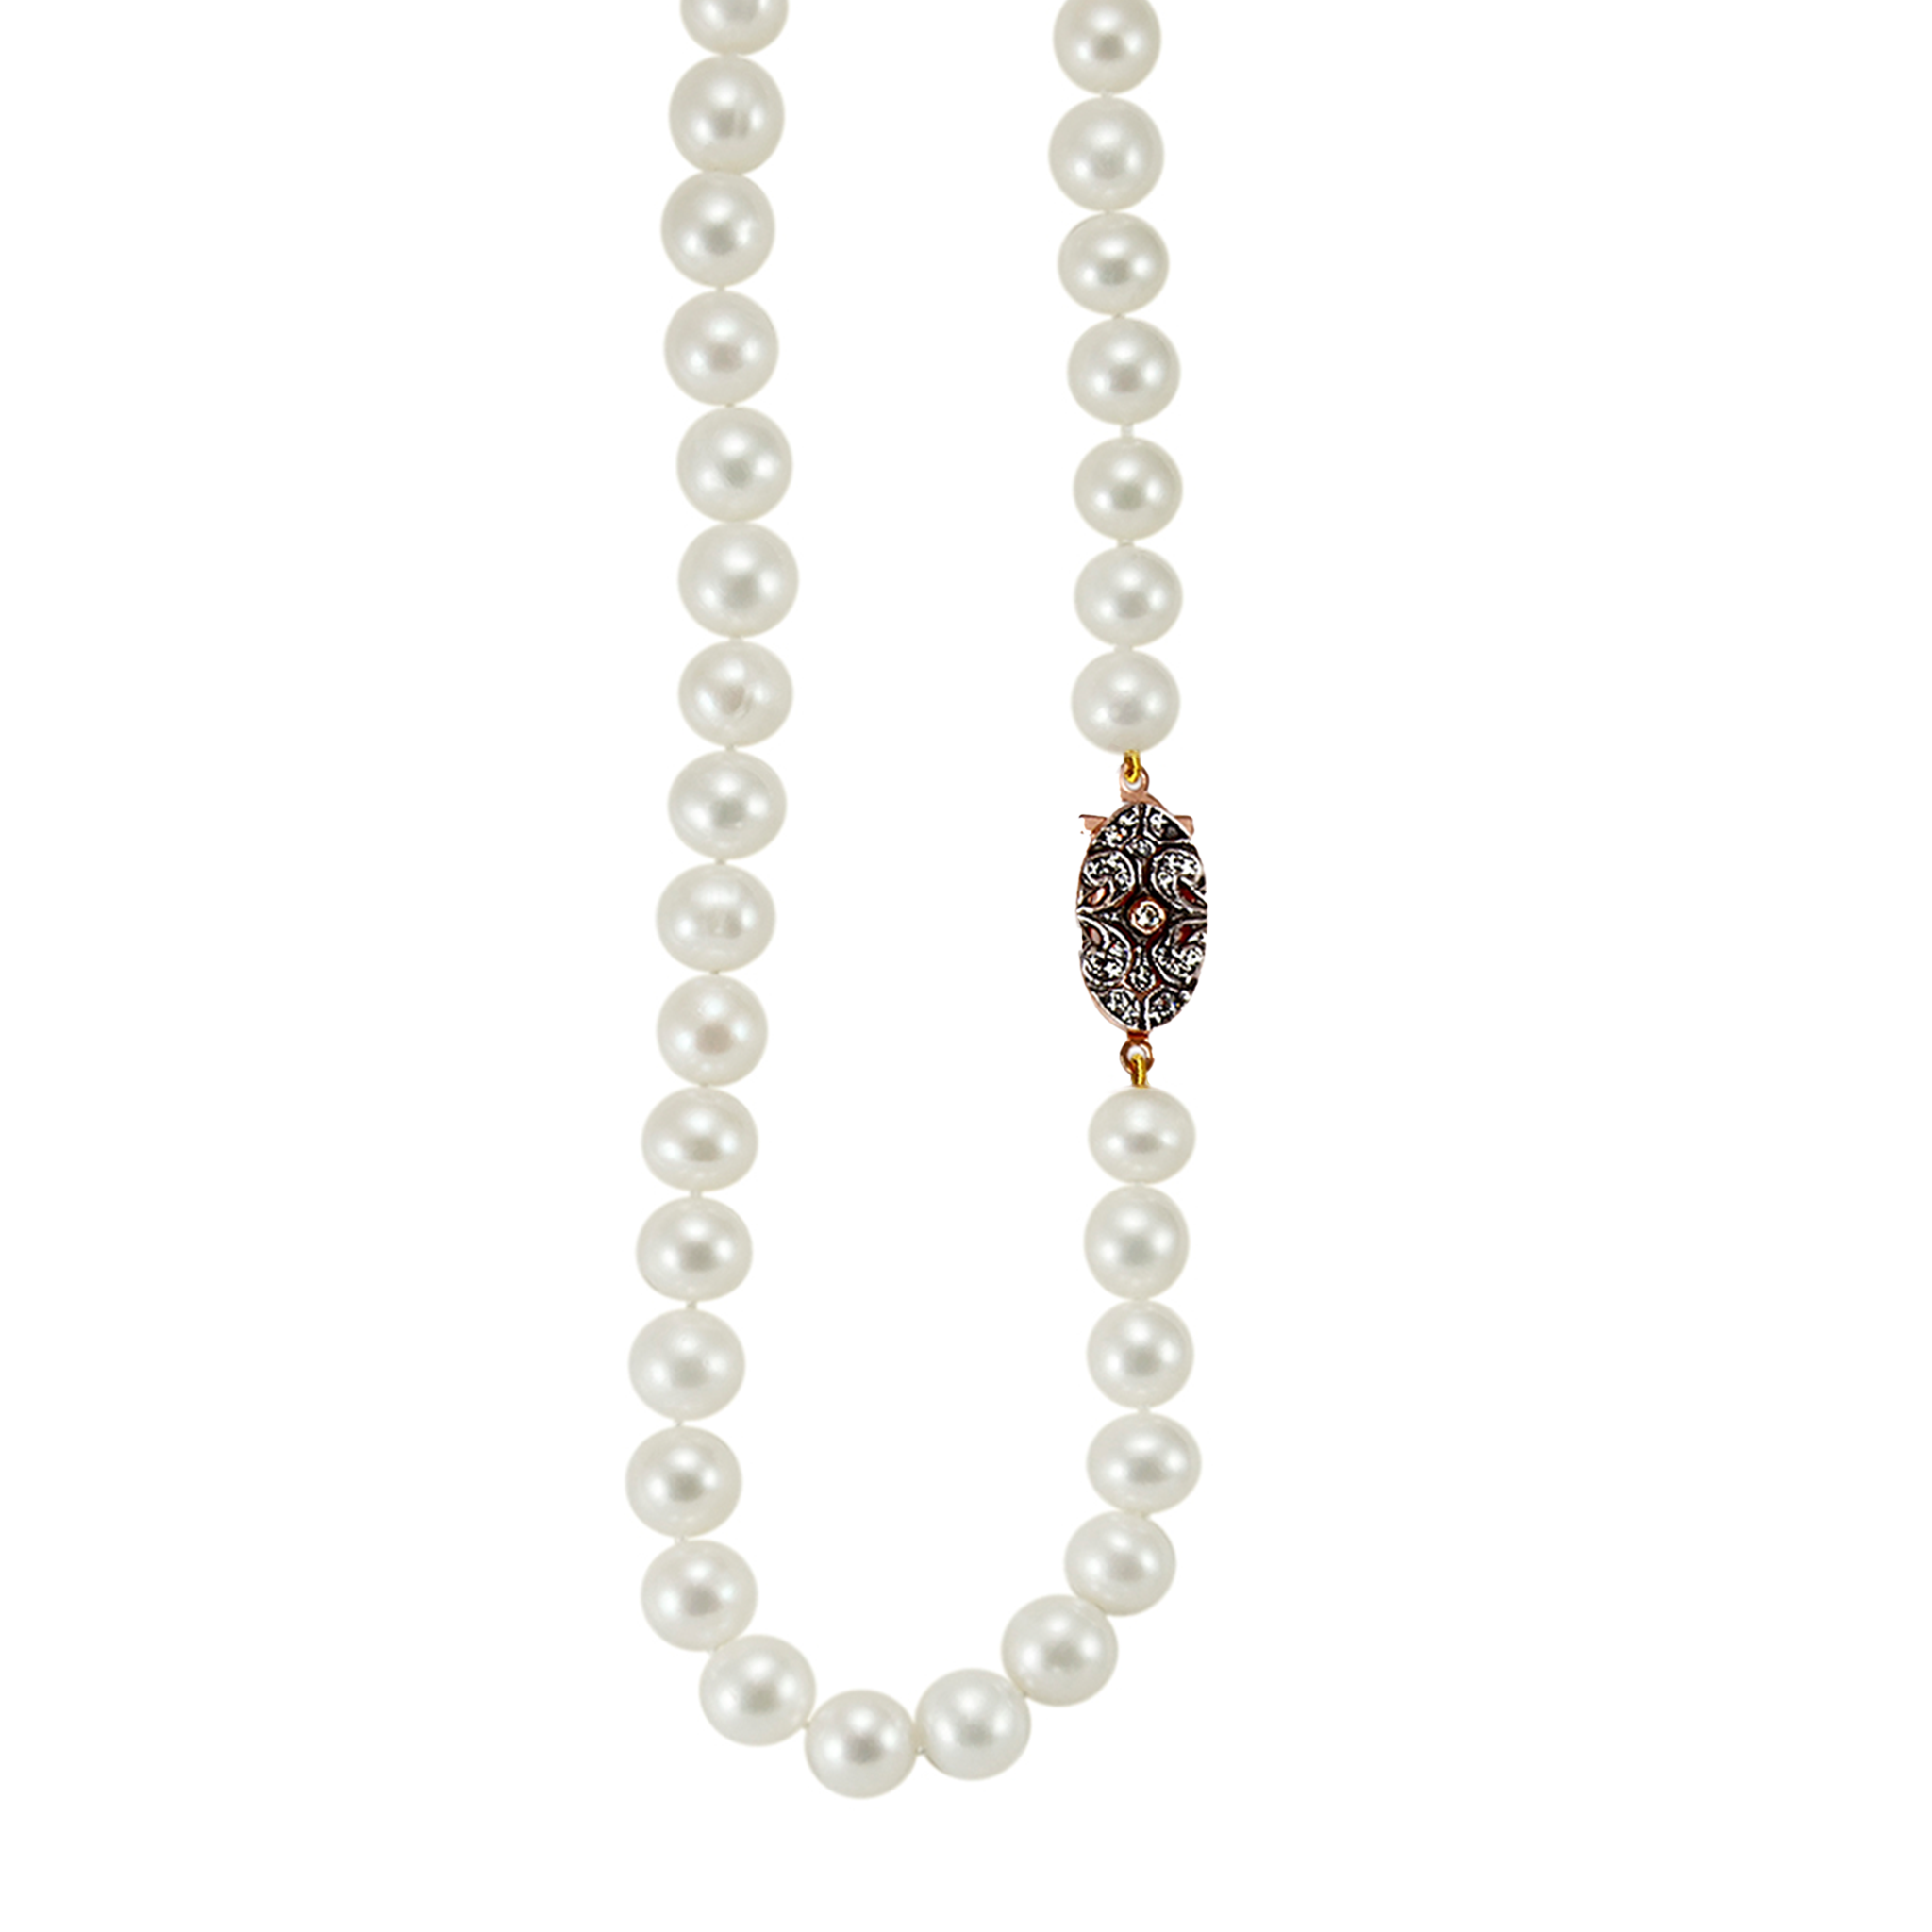 White Pearl Necklace with Fume Crystal Oval Clasp - 48cm